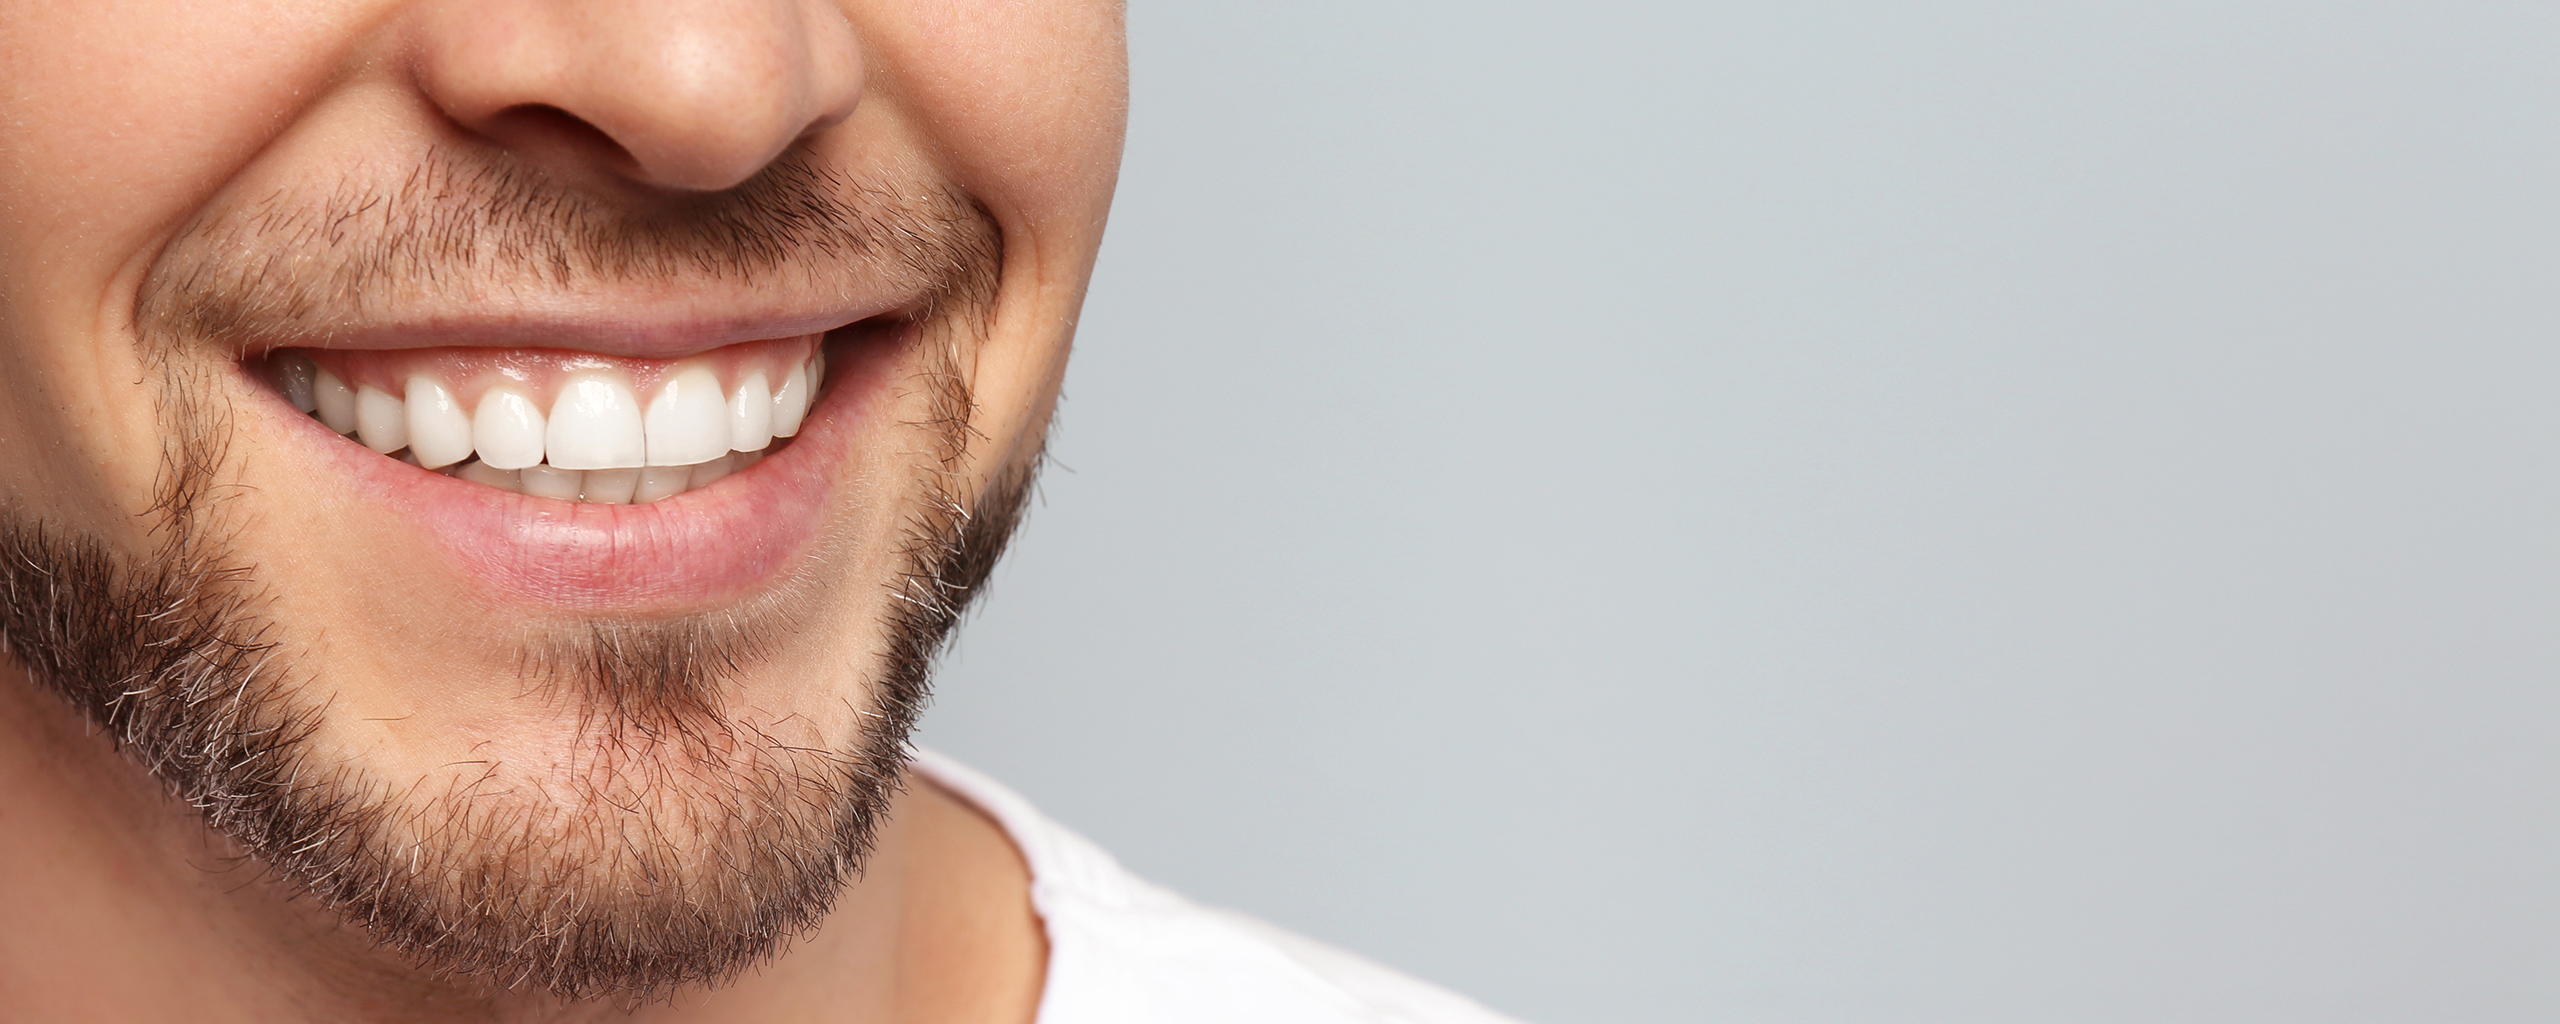 Does Invisalign® Fix an Overbite?